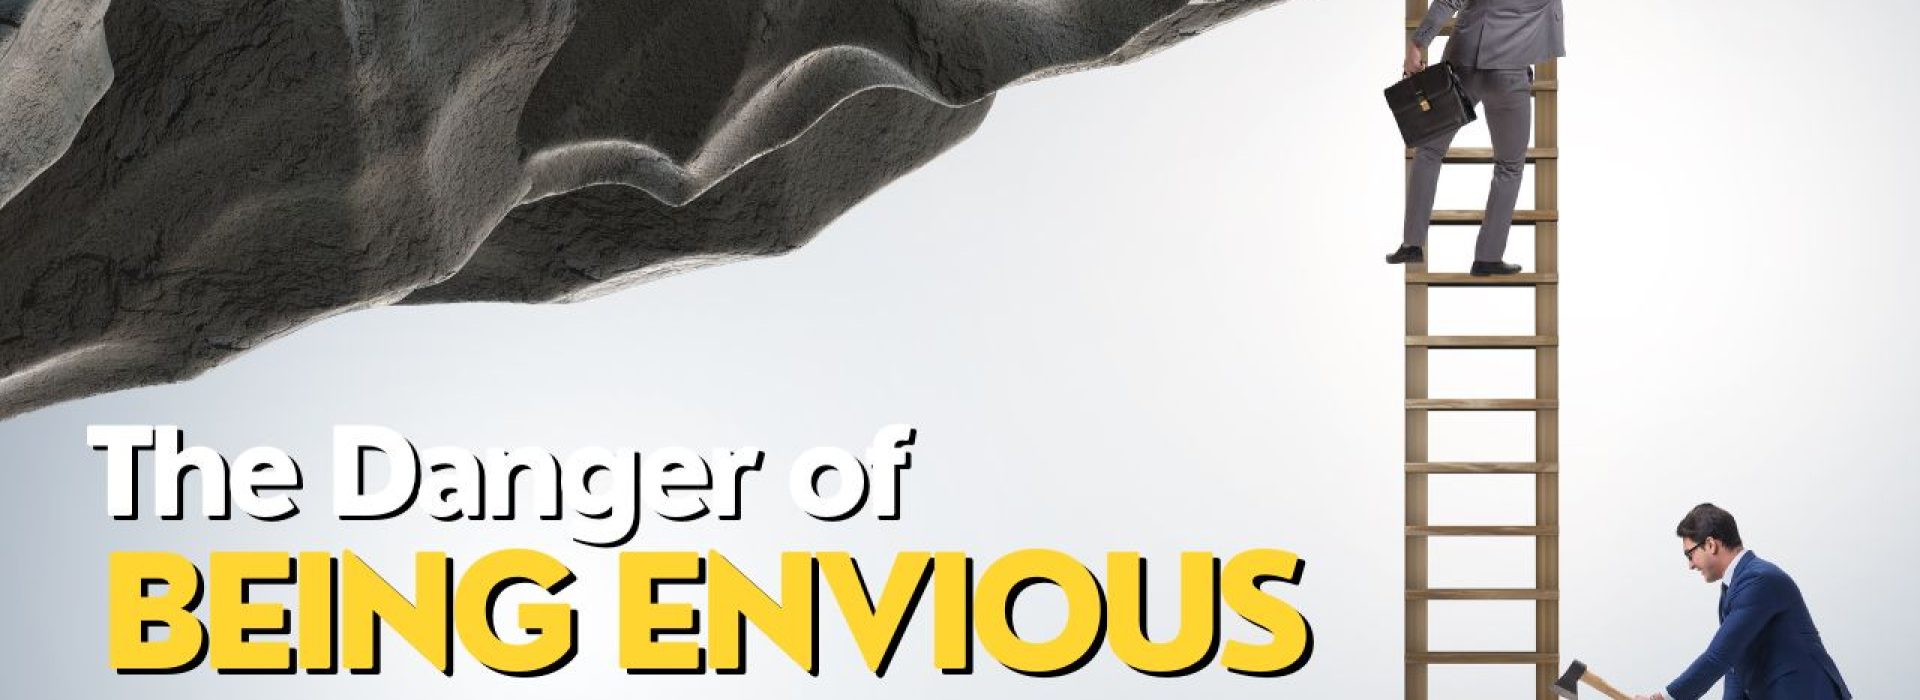 The Danger of Being Envious - Pastor Greg Neal